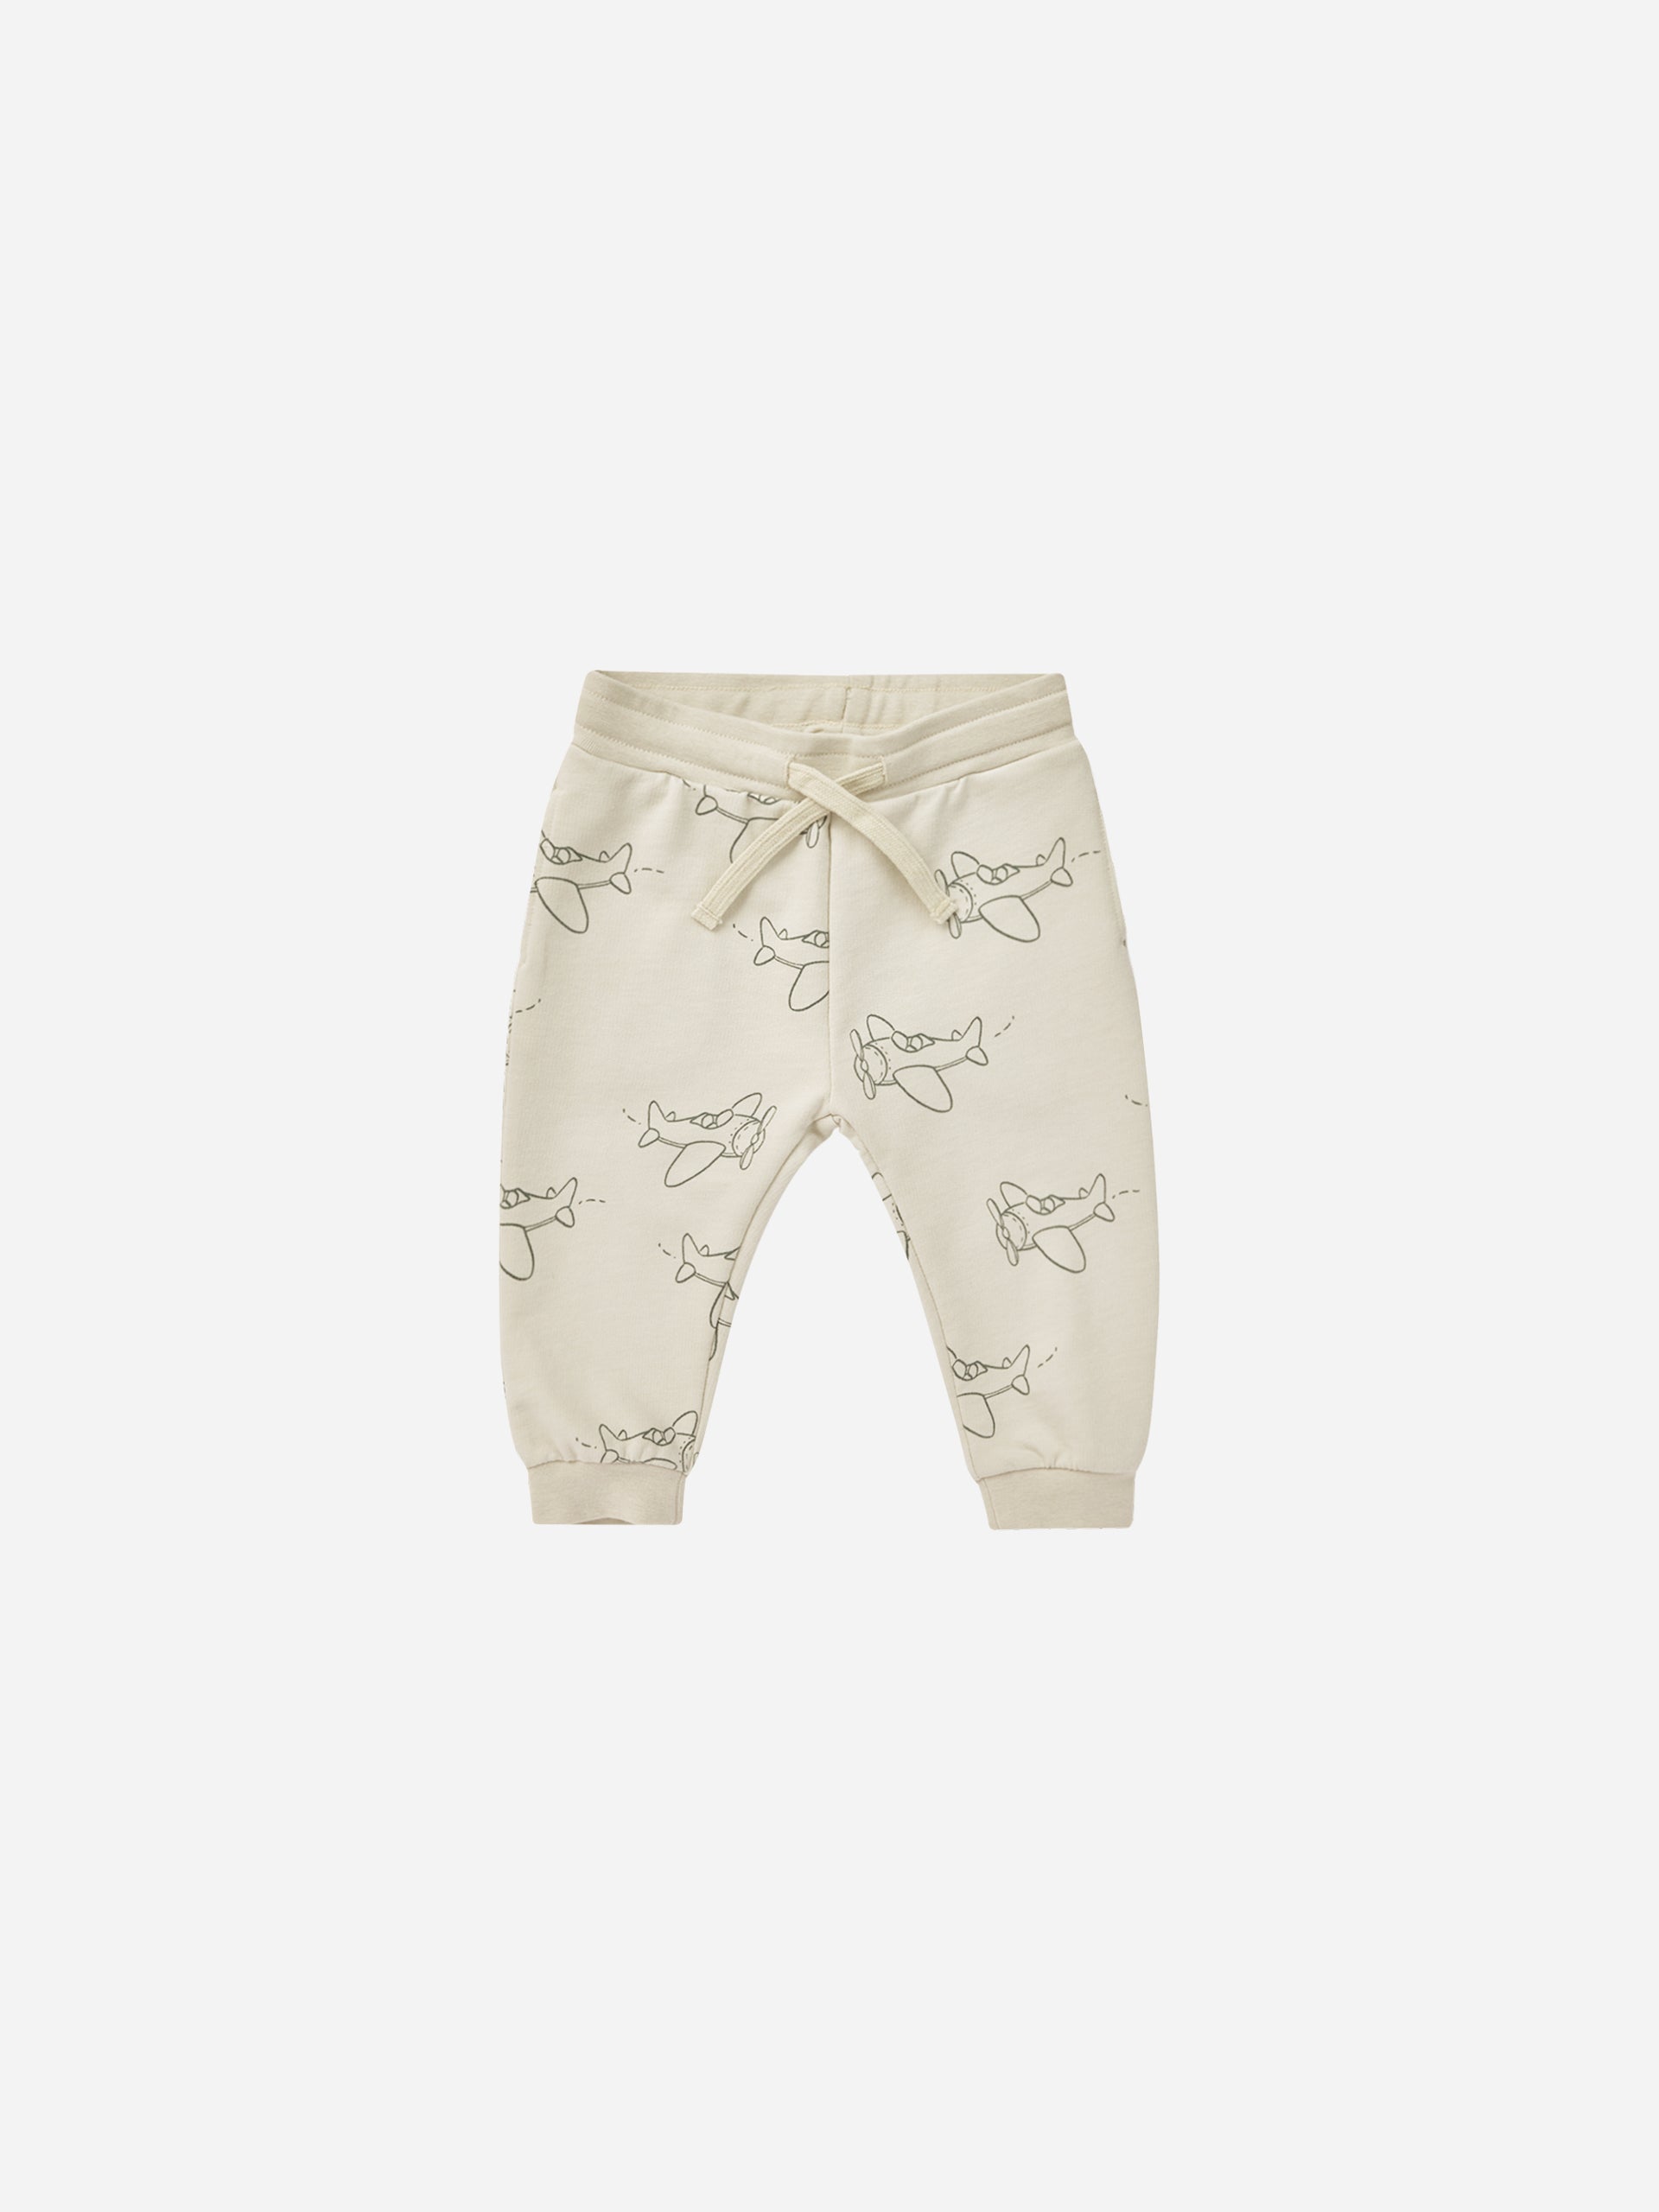 Jogger Sweatpant || Airplanes - Rylee + Cru | Kids Clothes | Trendy Baby Clothes | Modern Infant Outfits |